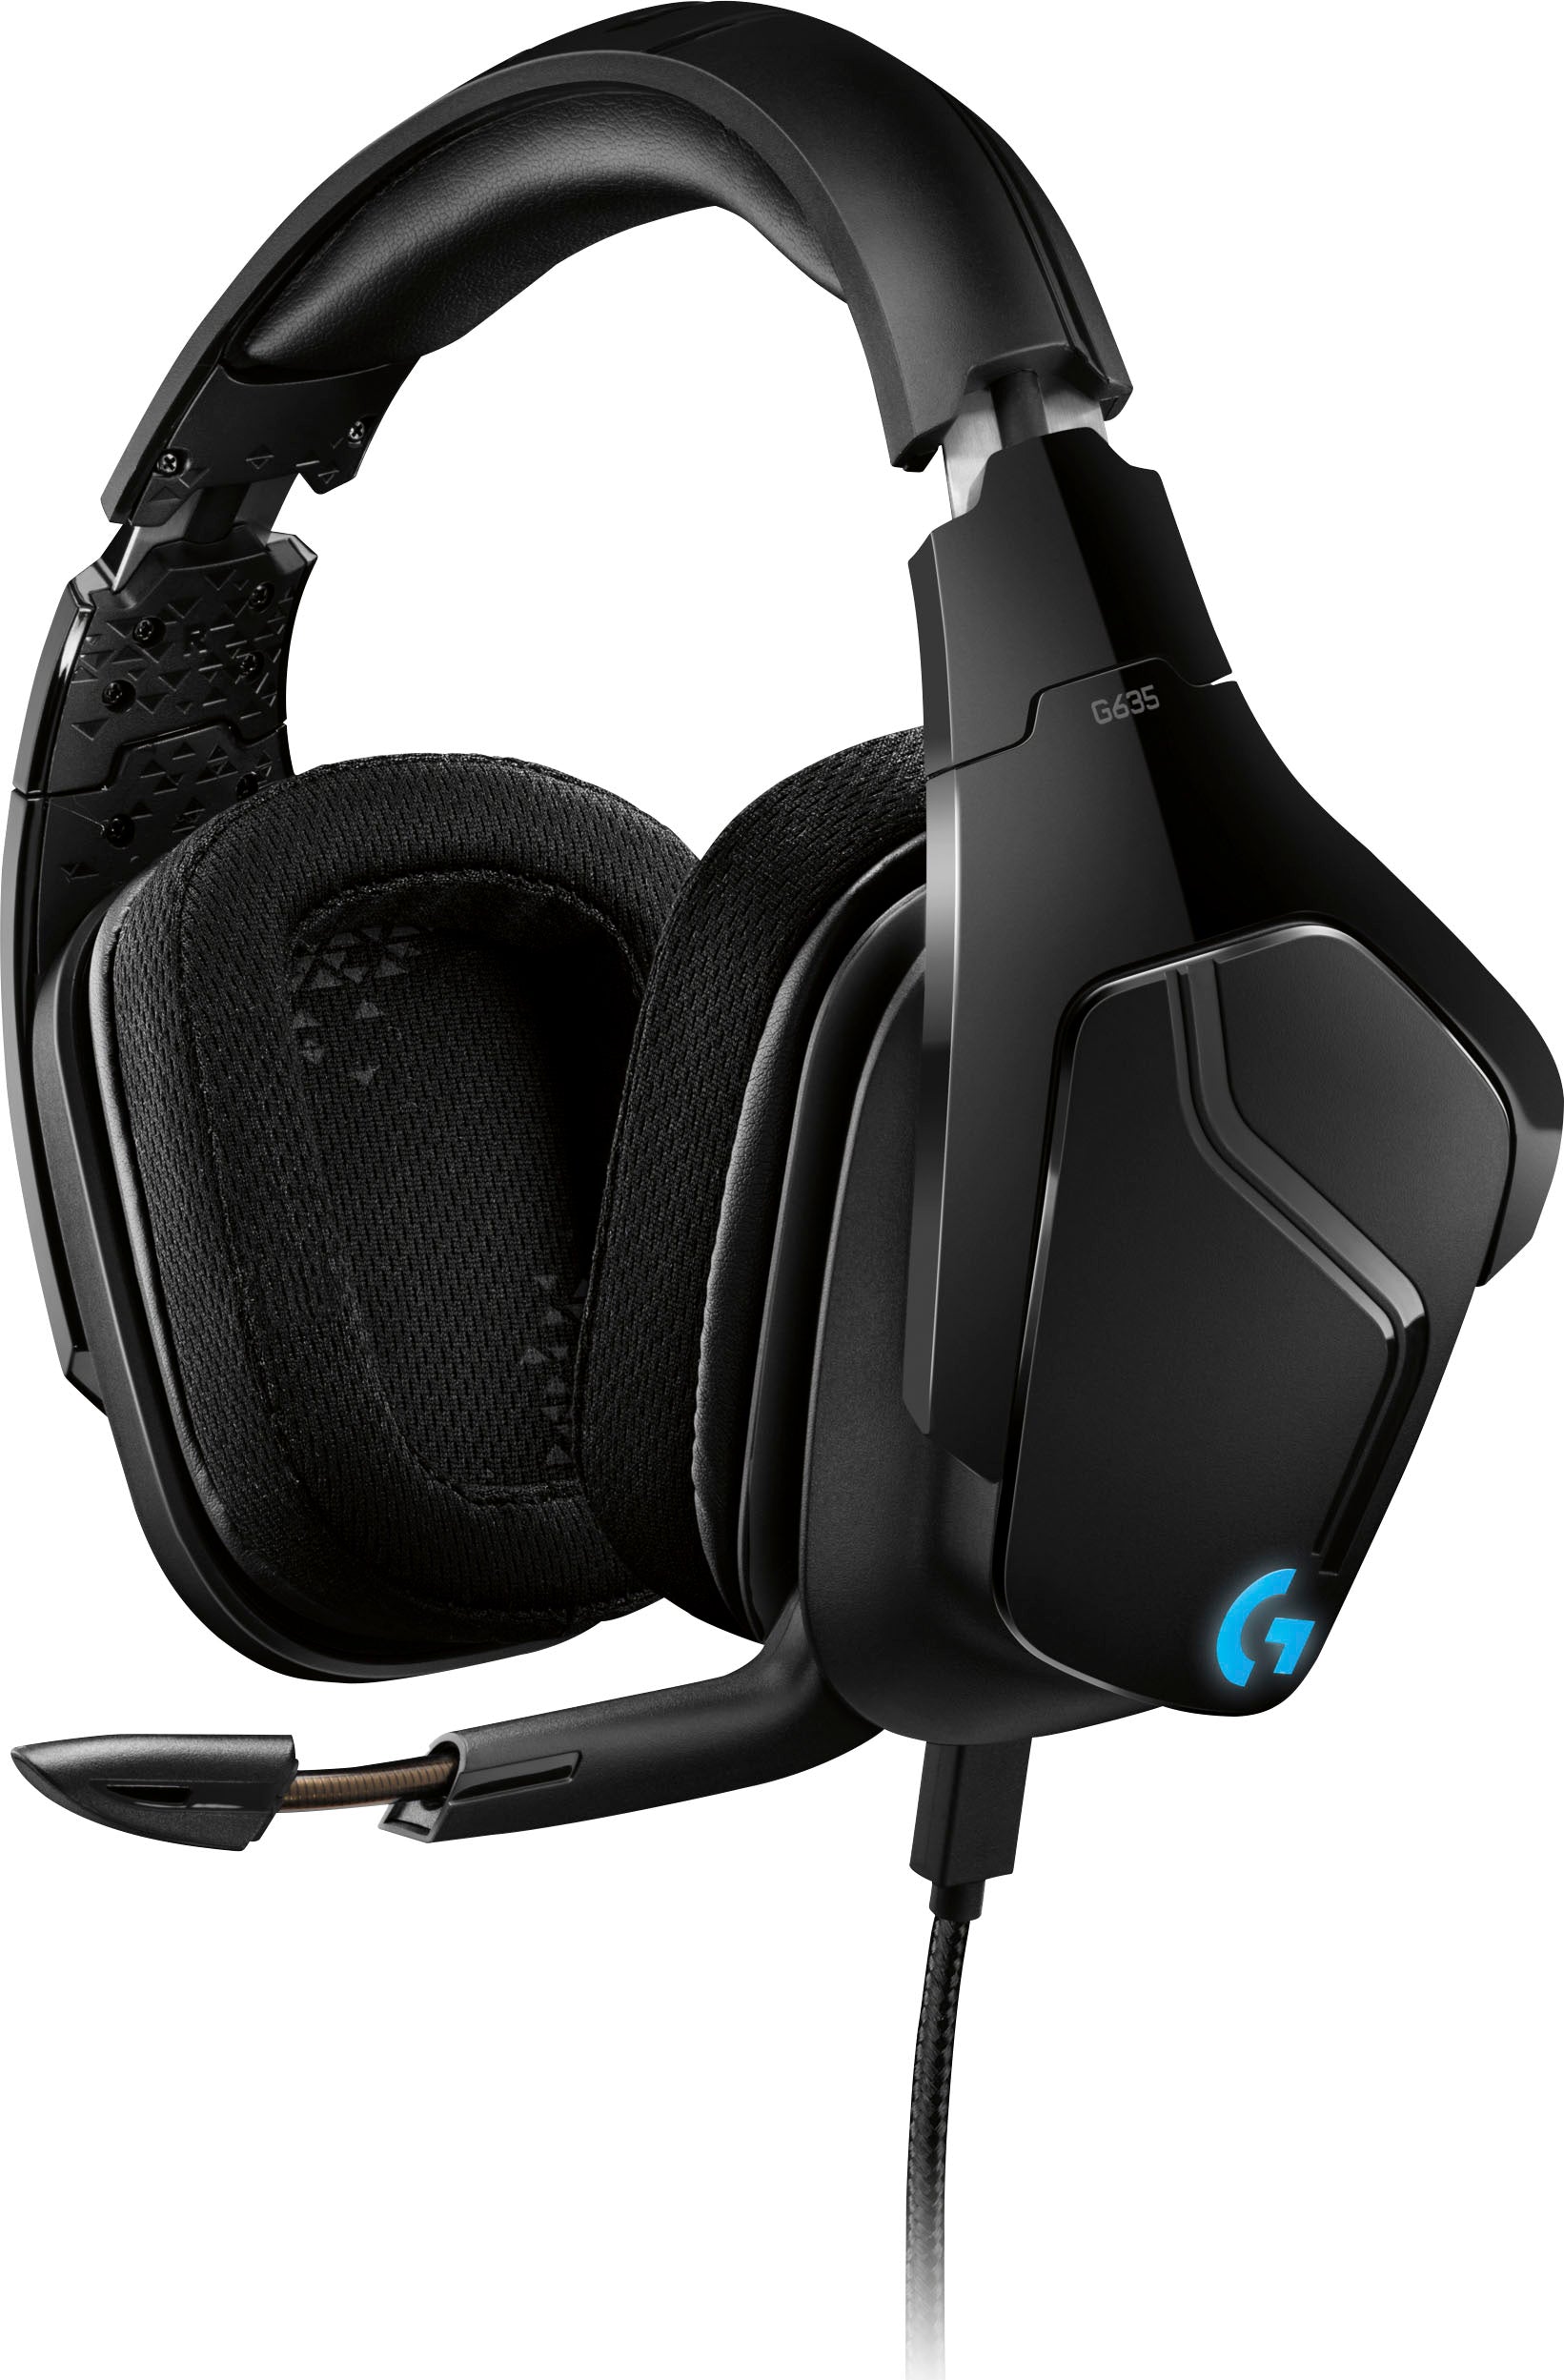 Logitech - 981-000748 G635 Wired 7.1 Surround Sound Over-the-Ear Gaming Headset for PC with LIGHTSYNC RGB Lighting - Black/Blue